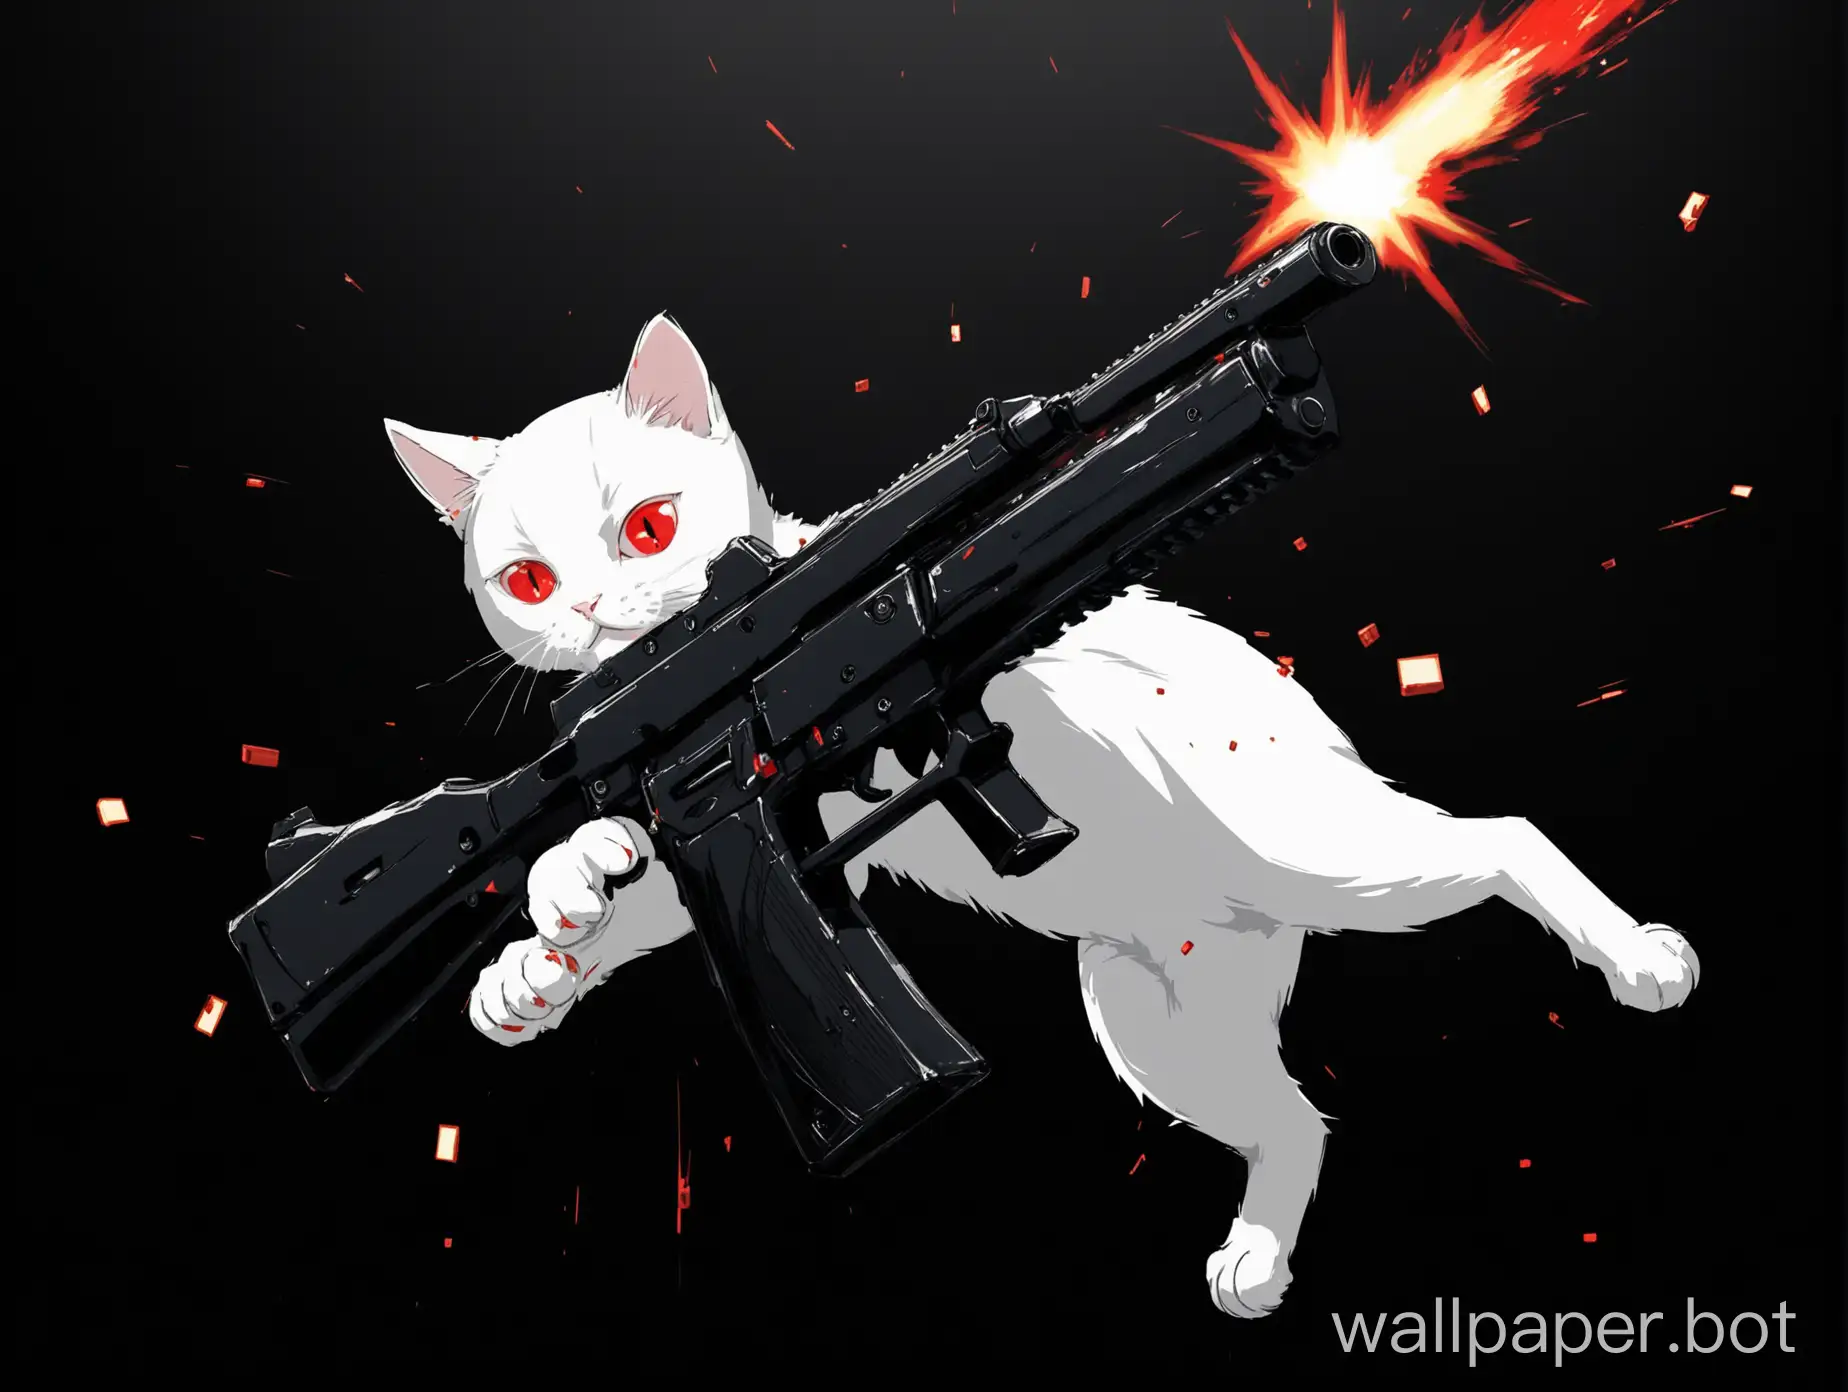 White-Cat-in-Black-Suit-Shooting-Everything-Against-Black-Background